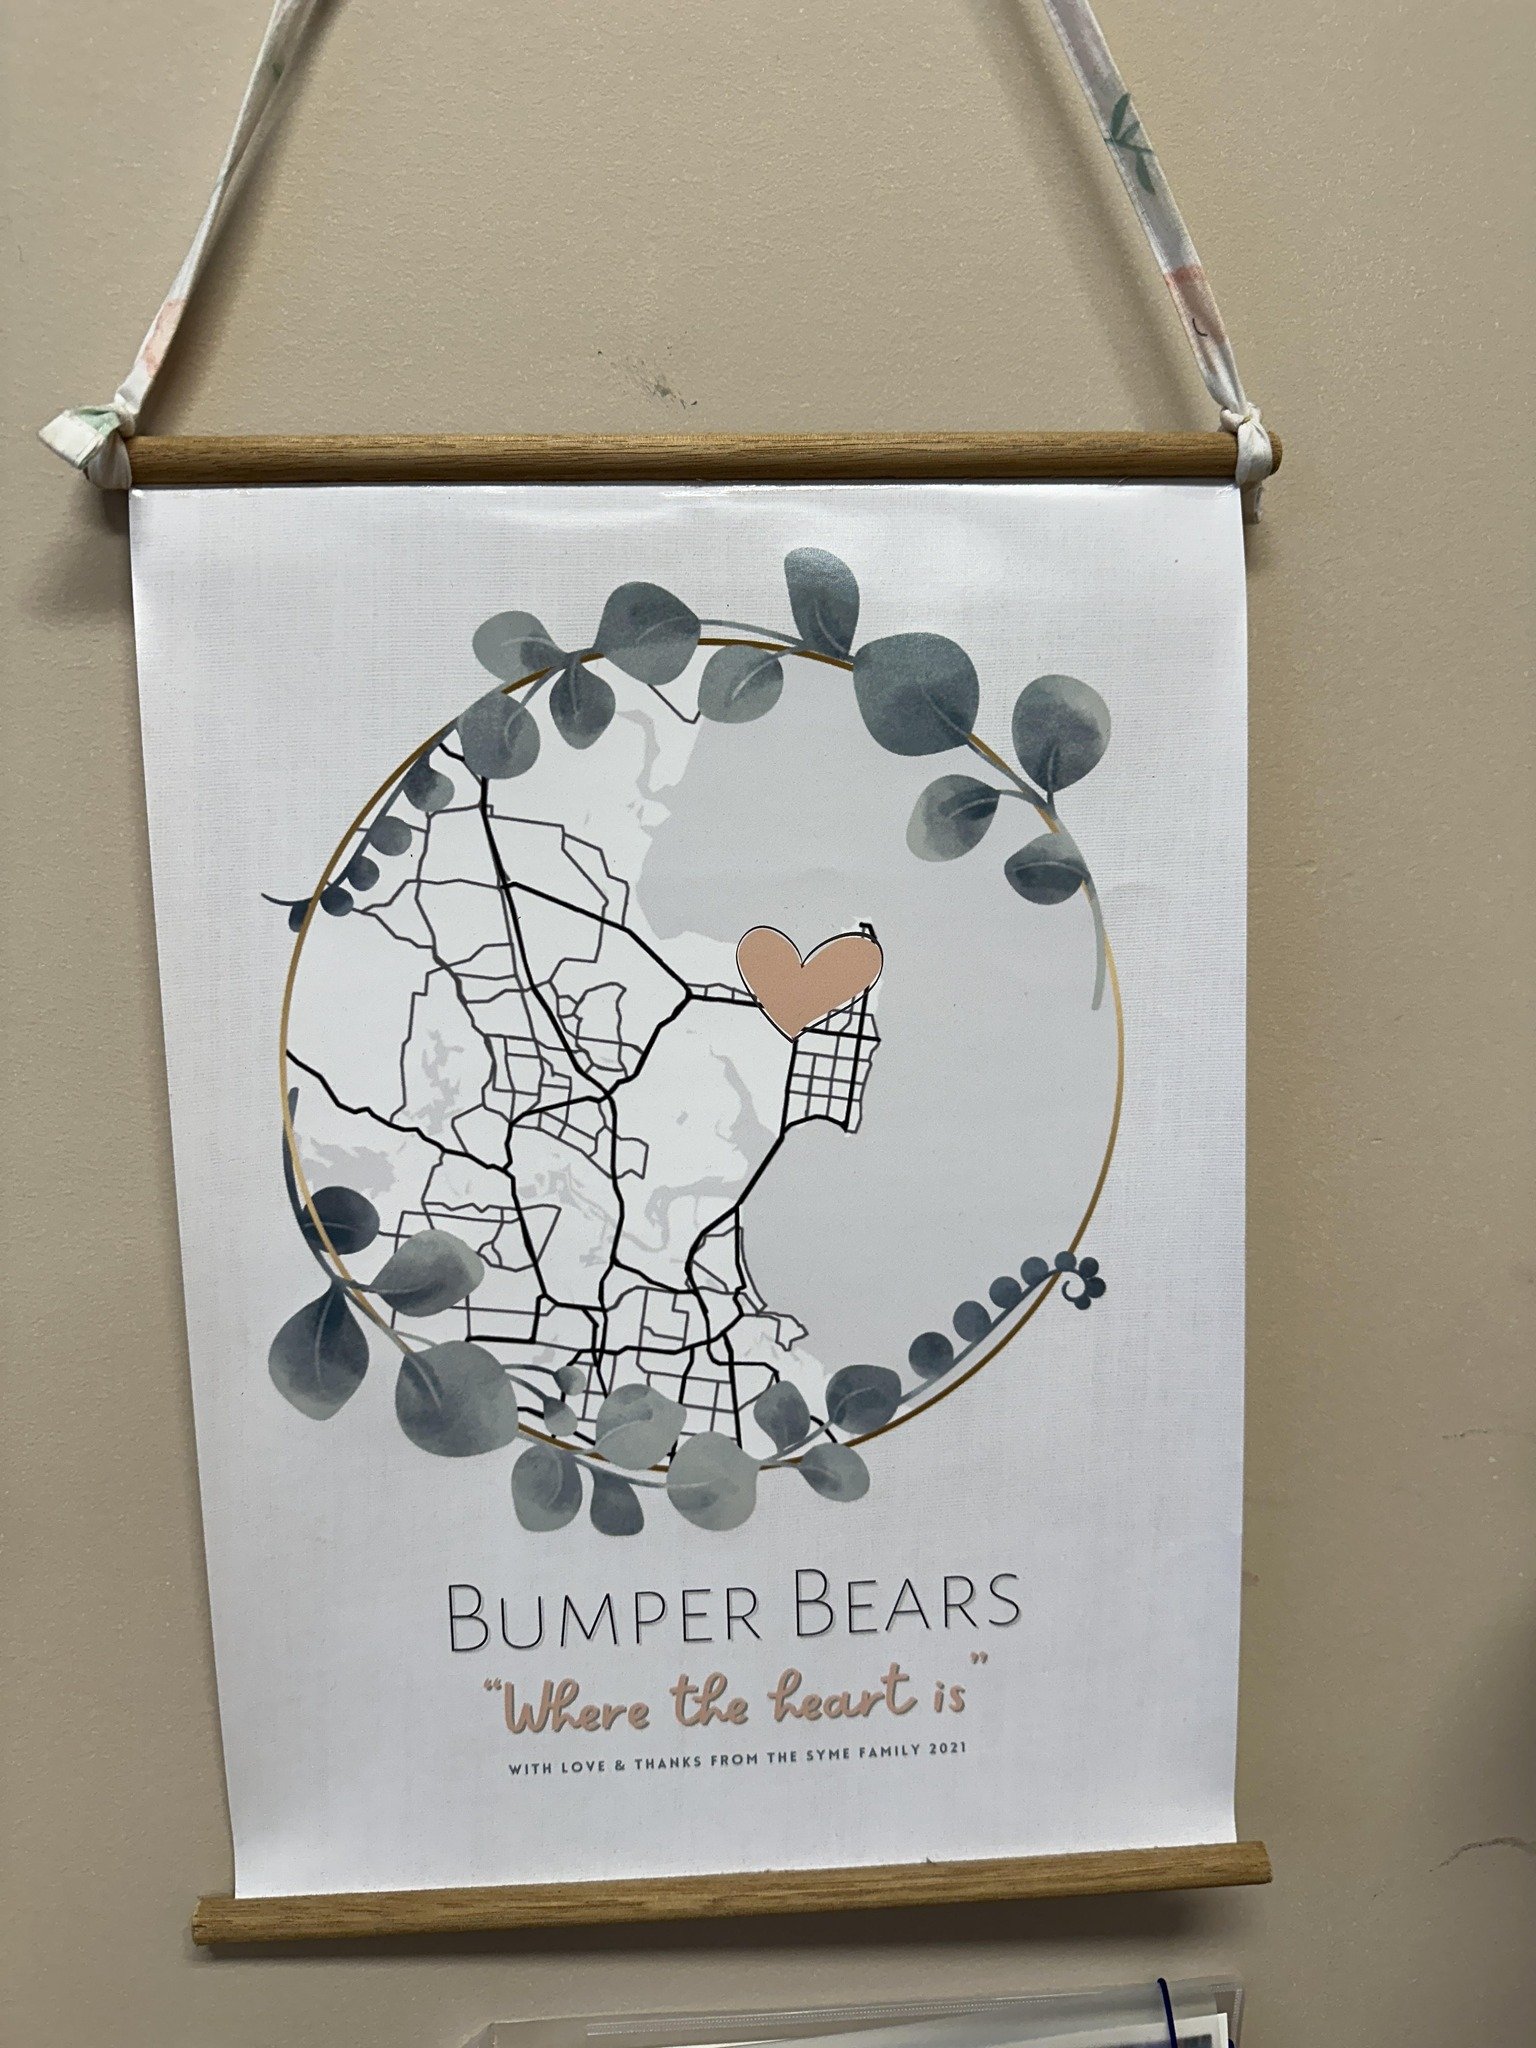 So lovely when a family can express their love for our Centre - says it all really!!
#familylove #testimonial #bumperbearselc #HighQualityCare #longtermeducators #Stableteam  #respect #Culture #dreamteam